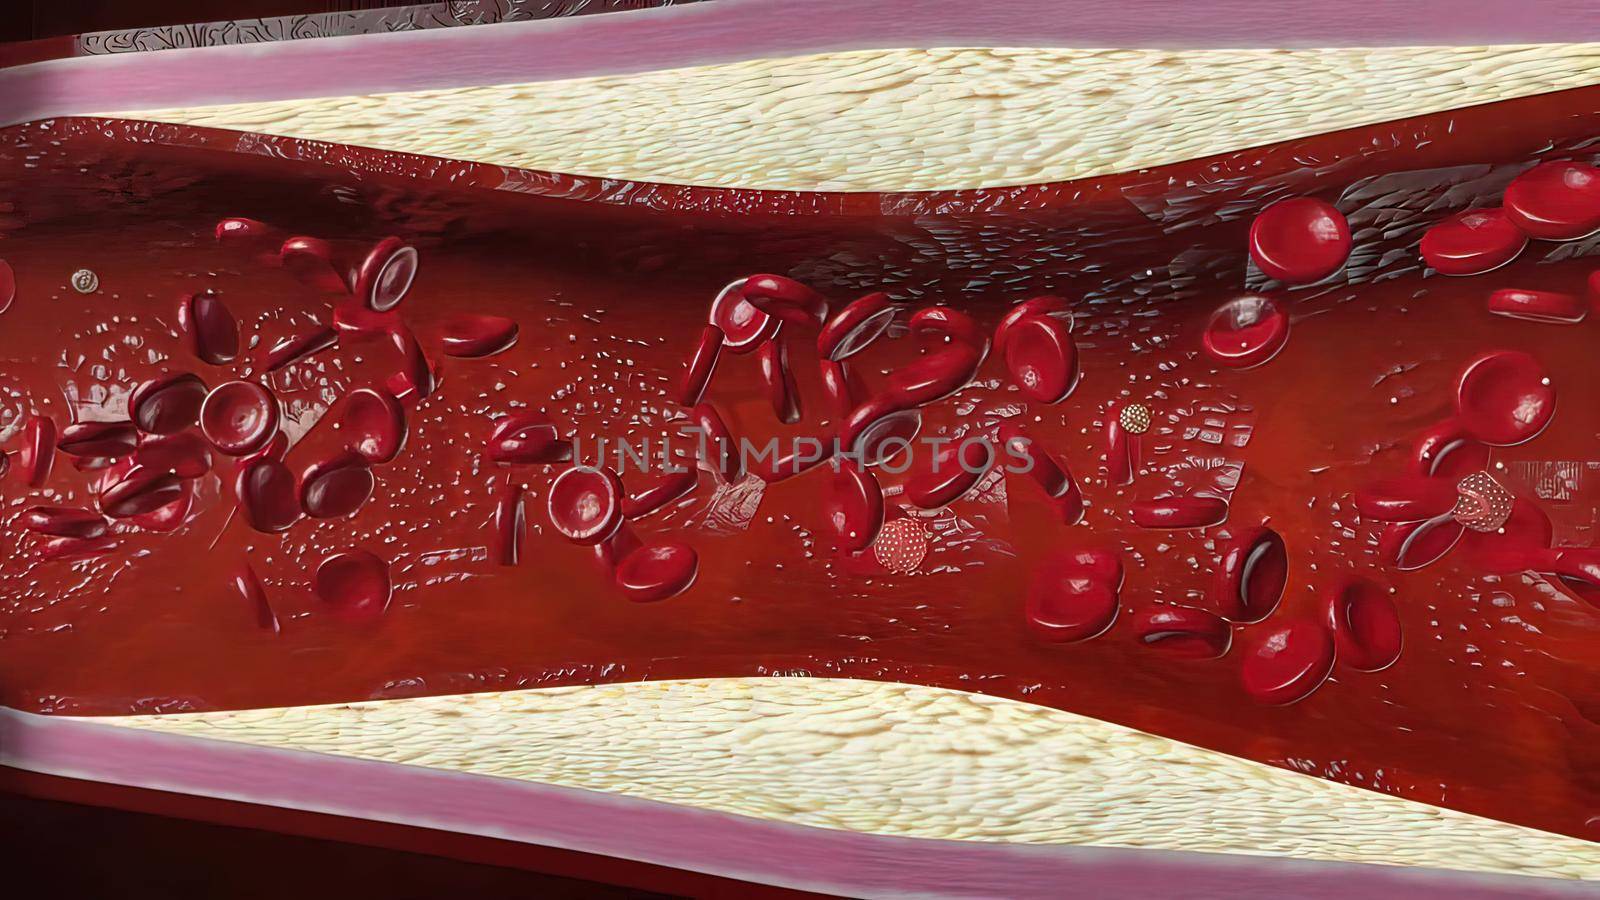 Atherosclerosis with cholesterol blood or plaque in vessel cause of coronary artery disease 3D illustration